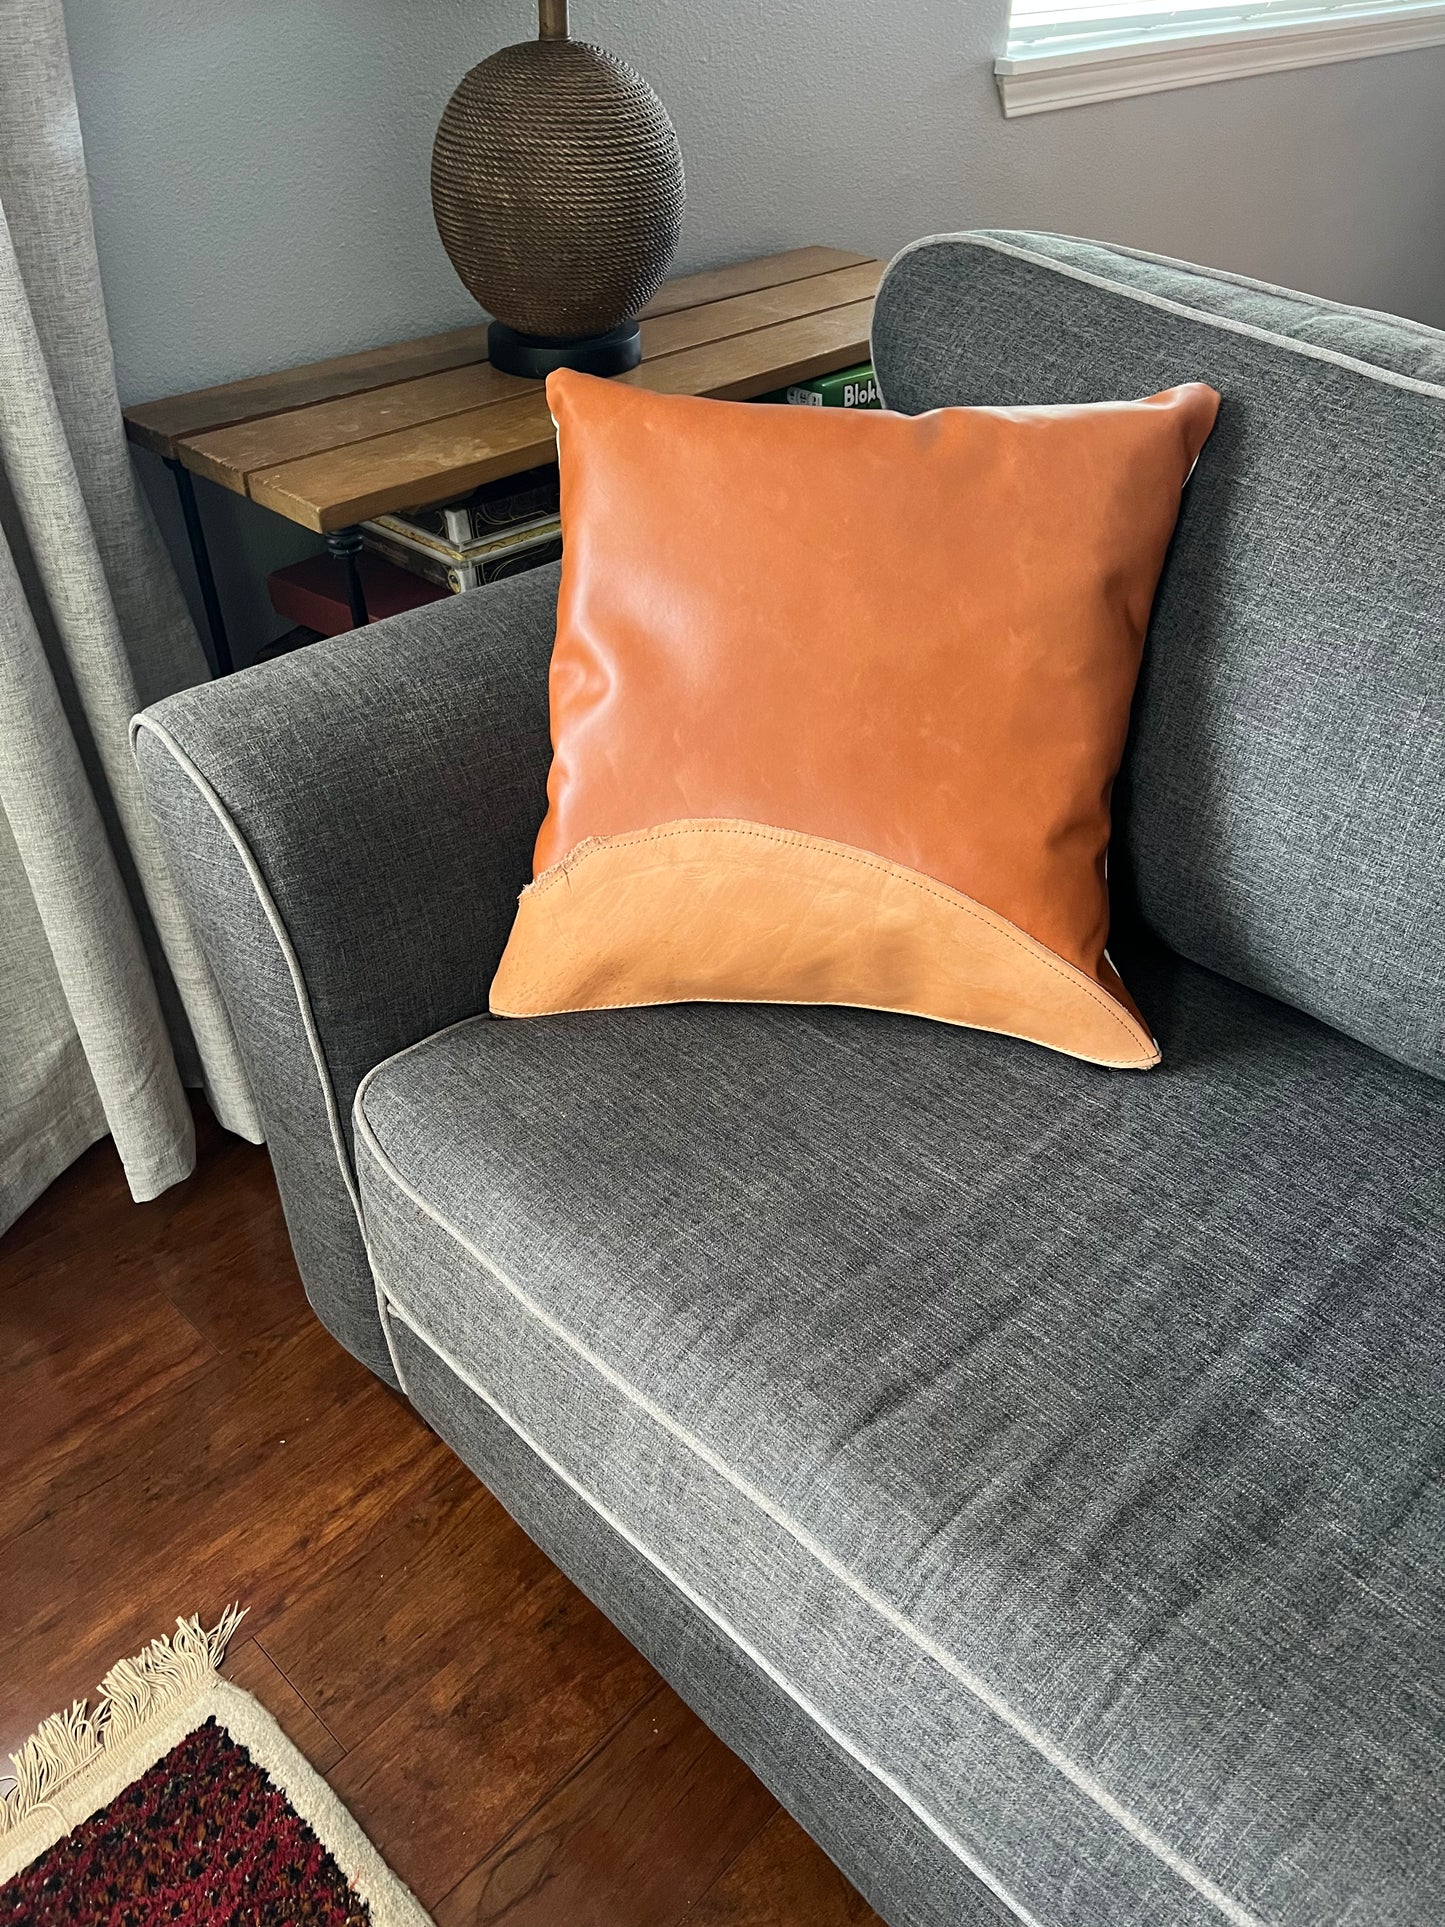 Leather Pillow | Couch Pillow | Decorative Leather Throw Pillow | Leather Home Accents